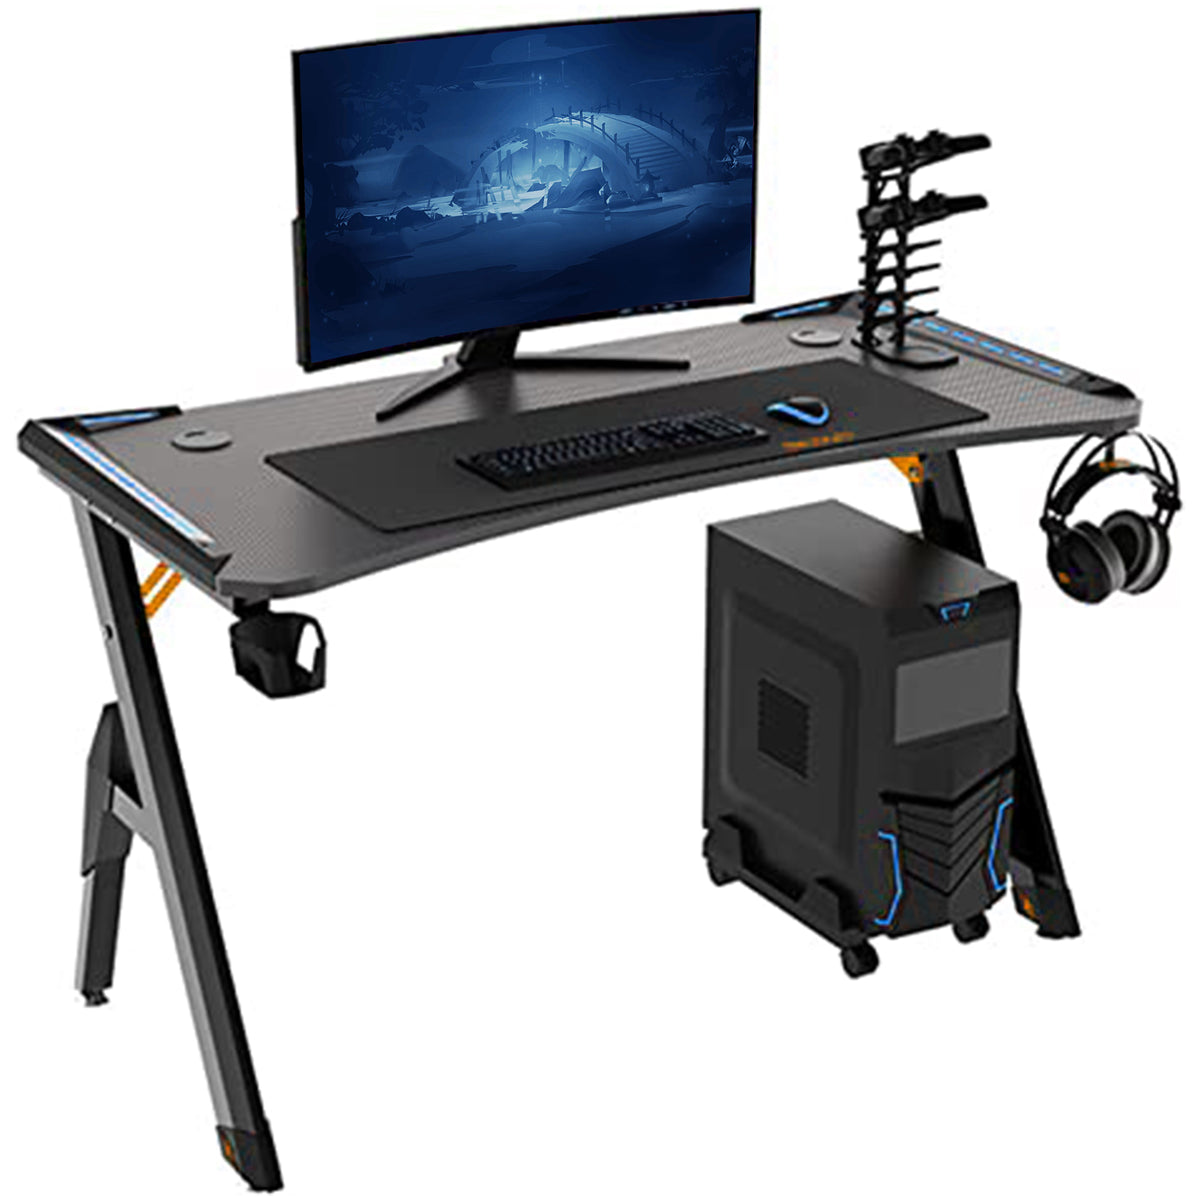 Verilux CPU Holder Stand,Mobile Computer Tower Stand with Wheels, Computer Mainframe Bracket,Adjustable PC Holder Cart - PC Host not Included(Black) - verilux